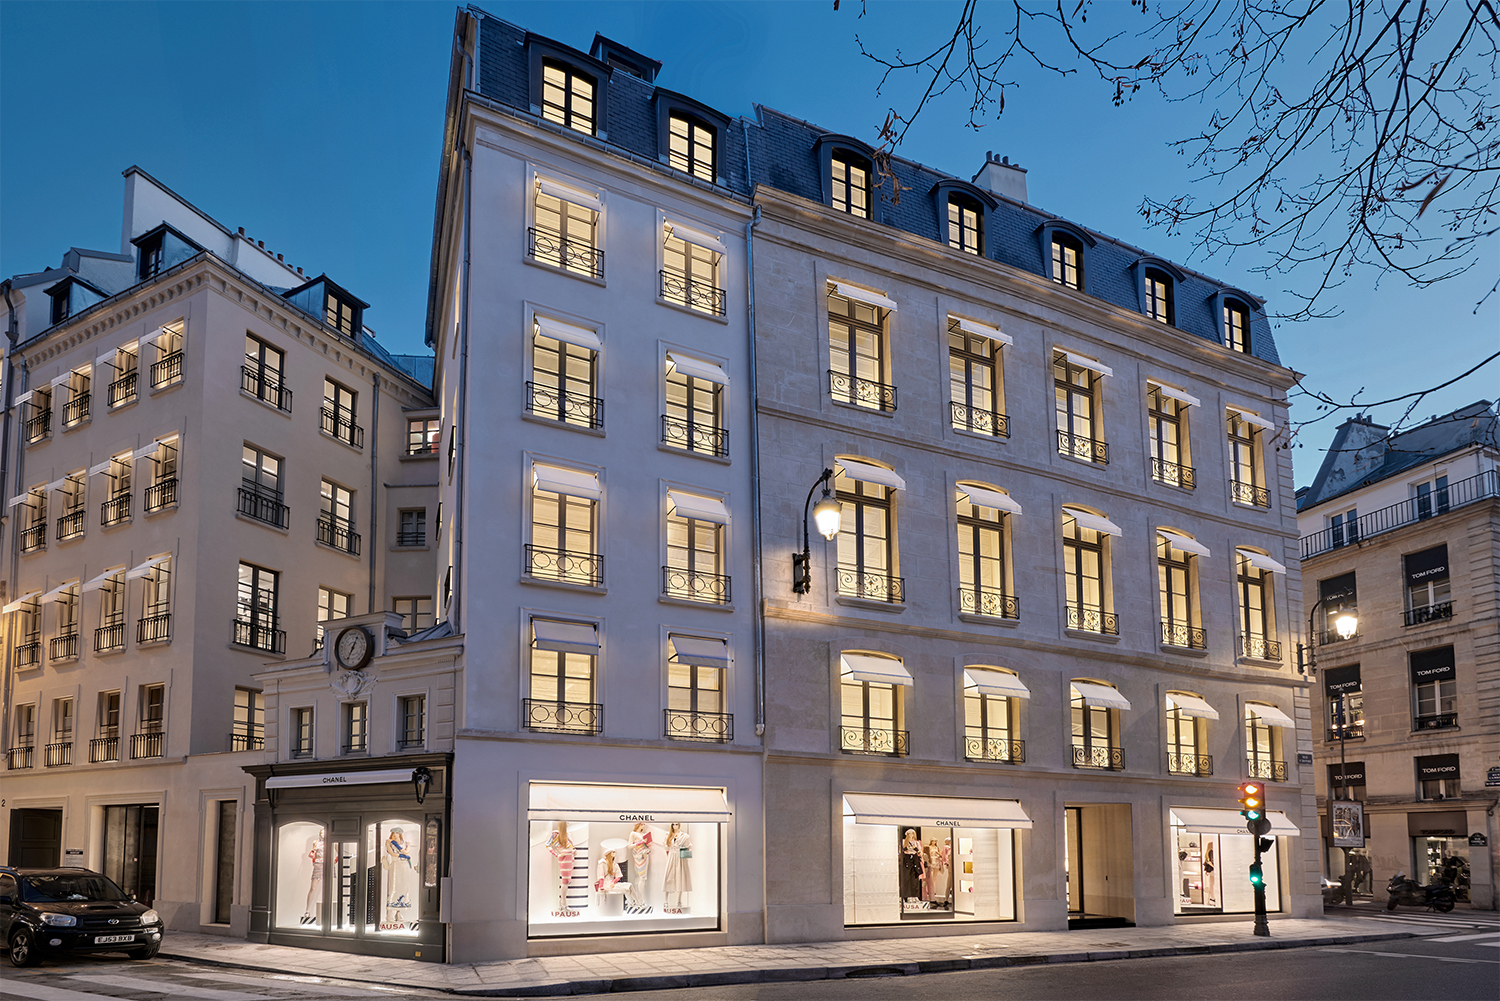 A NEW CHANEL STORE ON RUE CAMBON